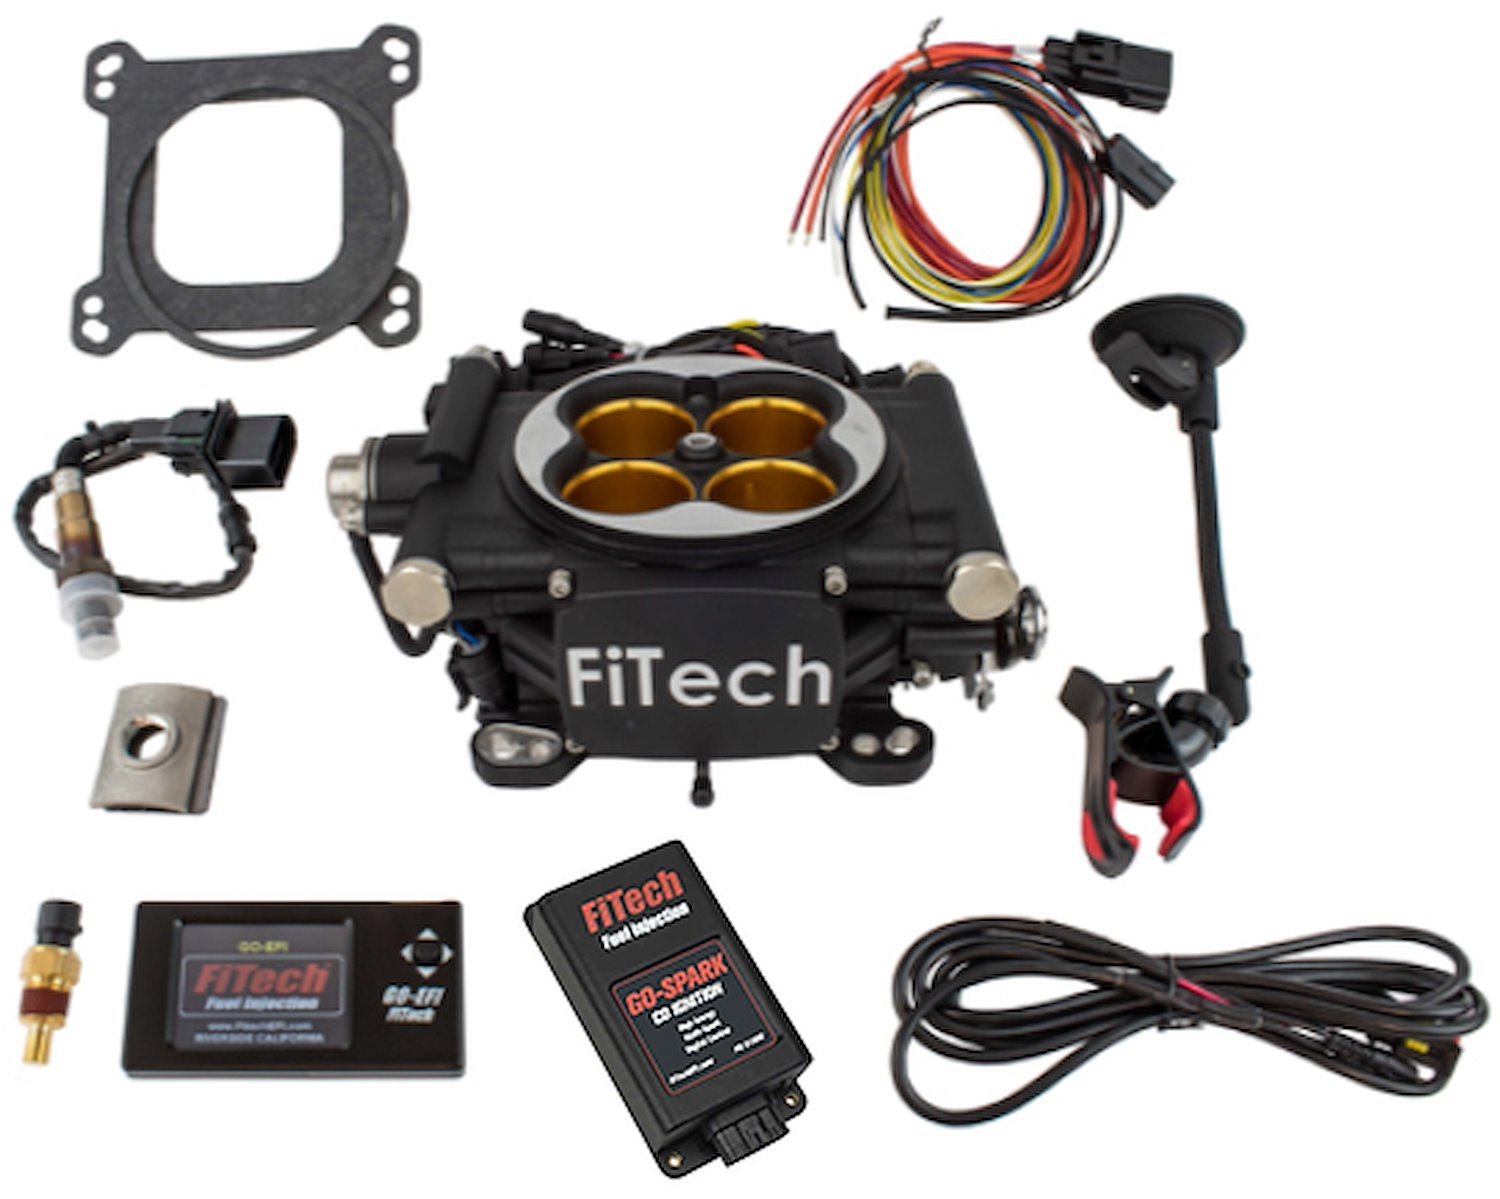 Go EFI-8 Power Adder Plus 1200 HP Throttle Body Fuel Injection Master Kit [with CDI Box] Matte Black